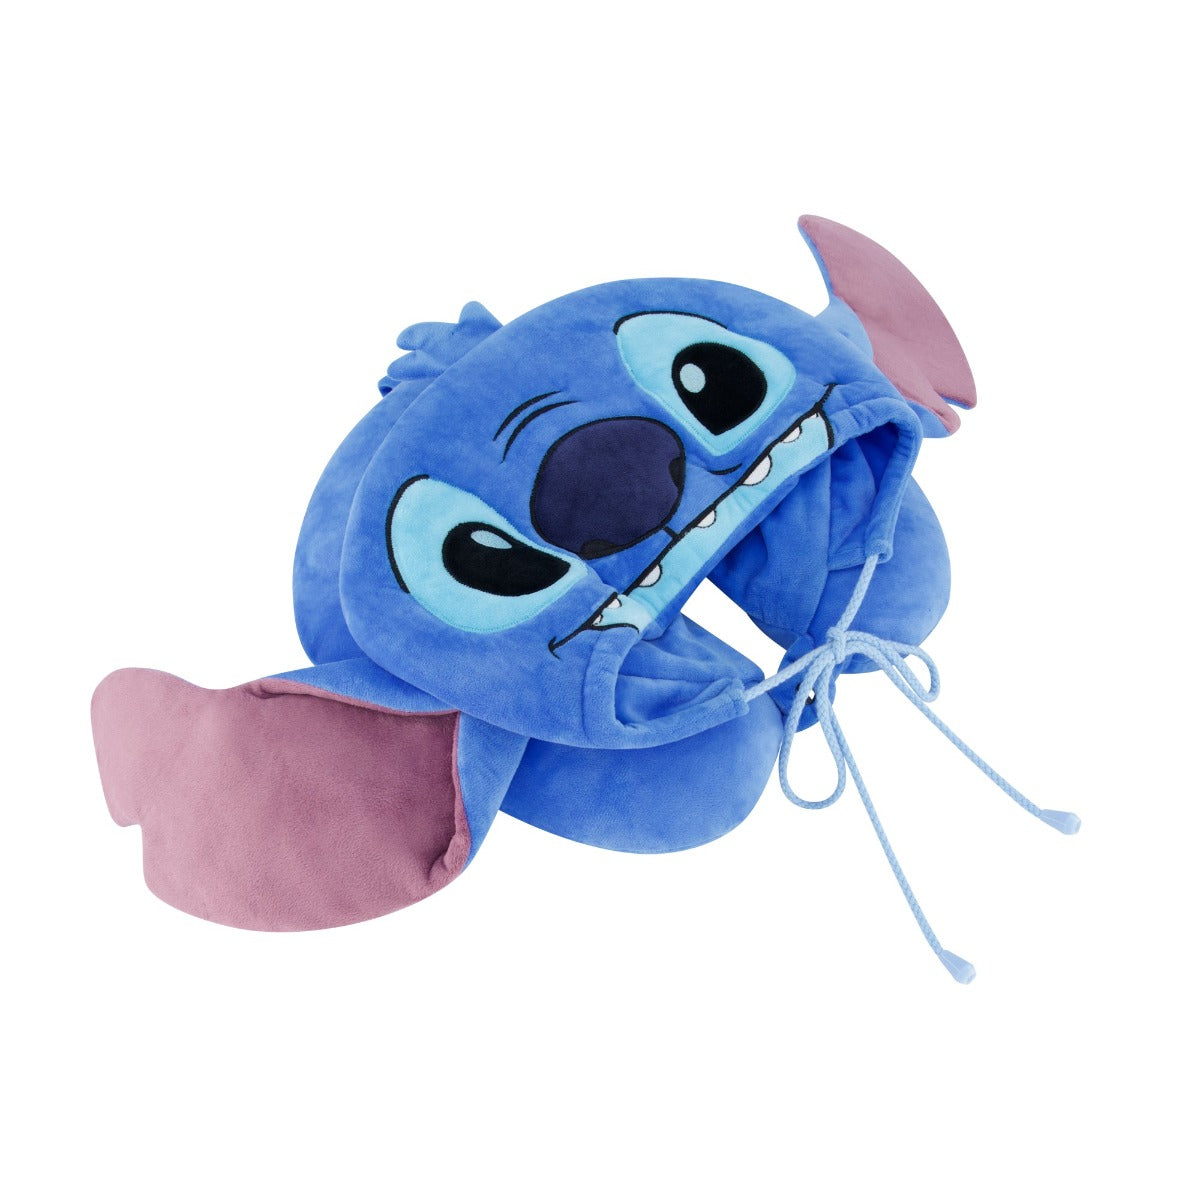 Blue Ful Disney Stitch hoodie neck pillow - best hooded travel pillows for traveling